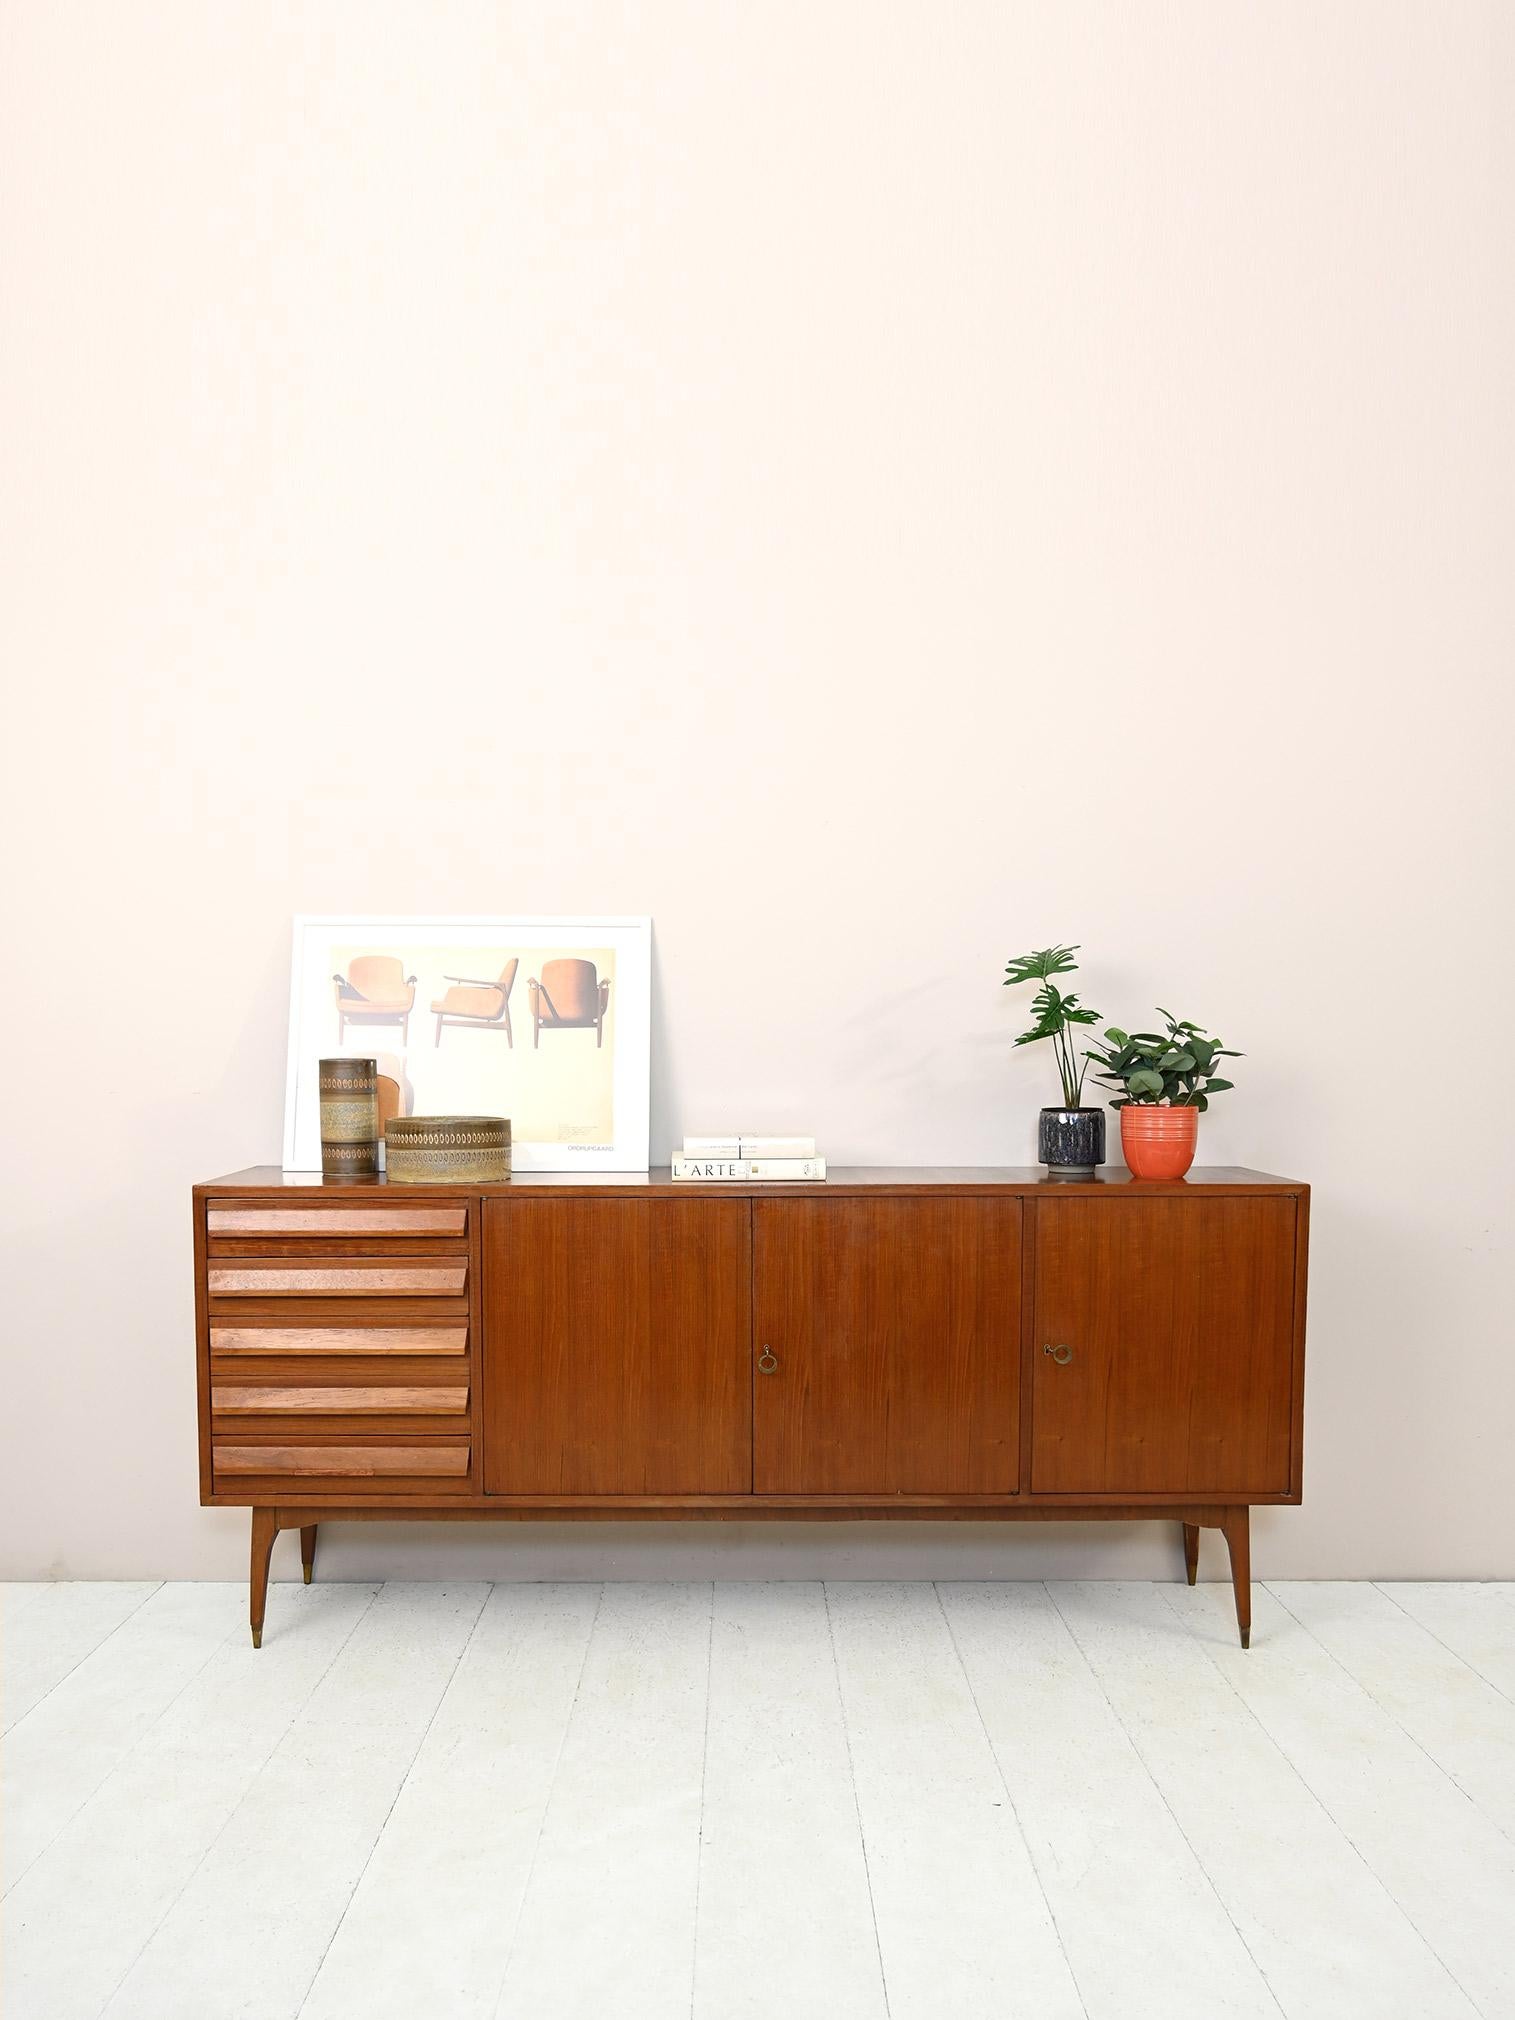 1960s teak sideboard with drawers.

Elegant piece of furniture of Italian origin with important dimensions, measuring in fact 205 cm.
Consisting of 5 drawers and two compartments closed by hinged doors equipped with a lock.
The wooden handle of